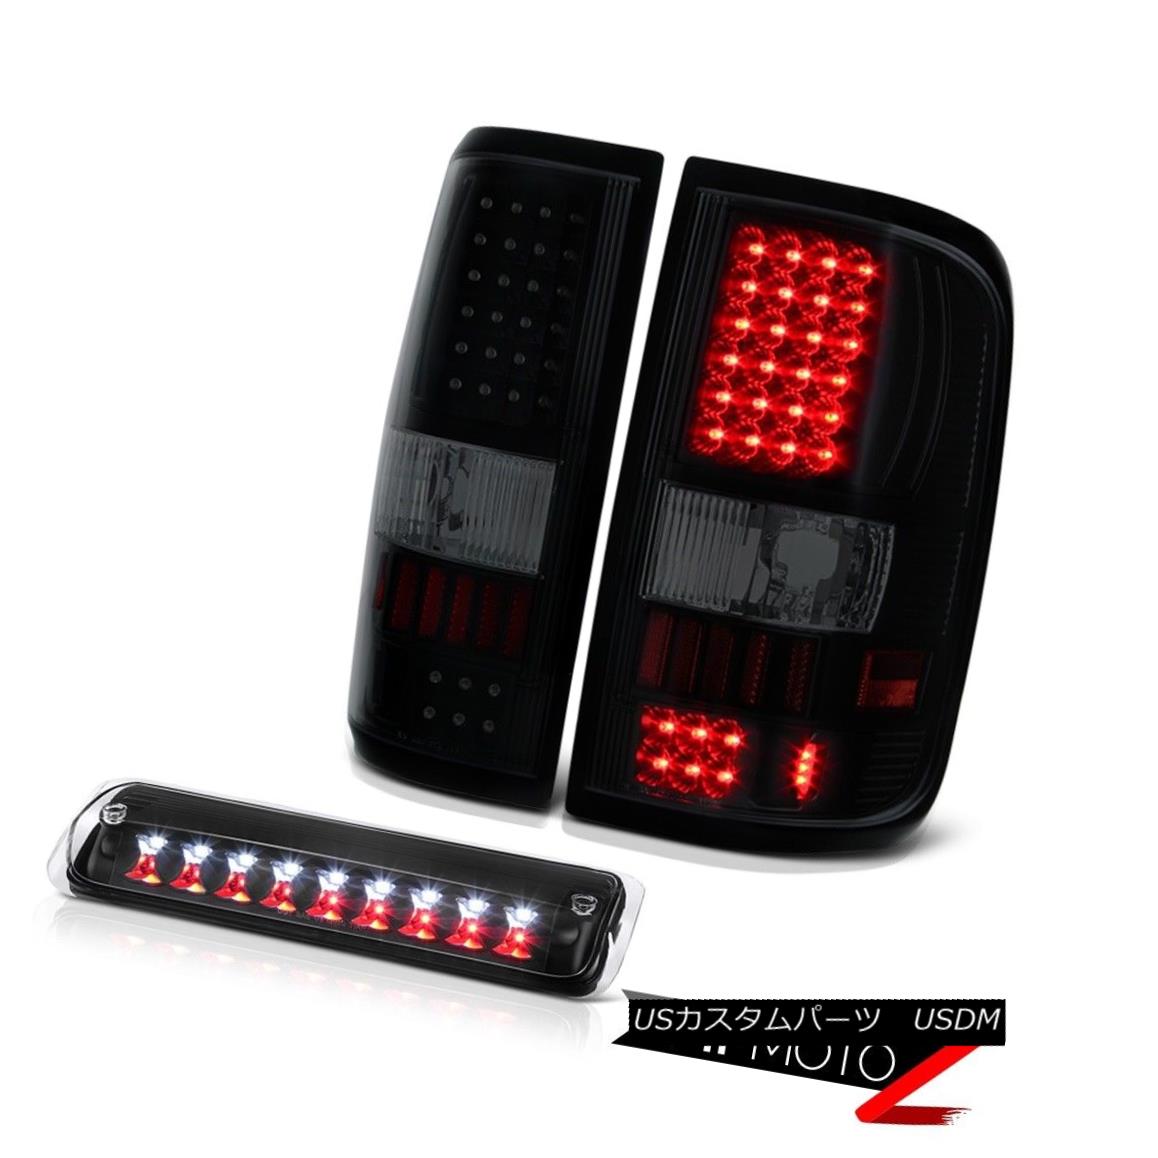 1999-2004 JEEP GRAND CHEROKEE LED TAIL LIGHTS RED PAIR 99 00 01 02 03 04